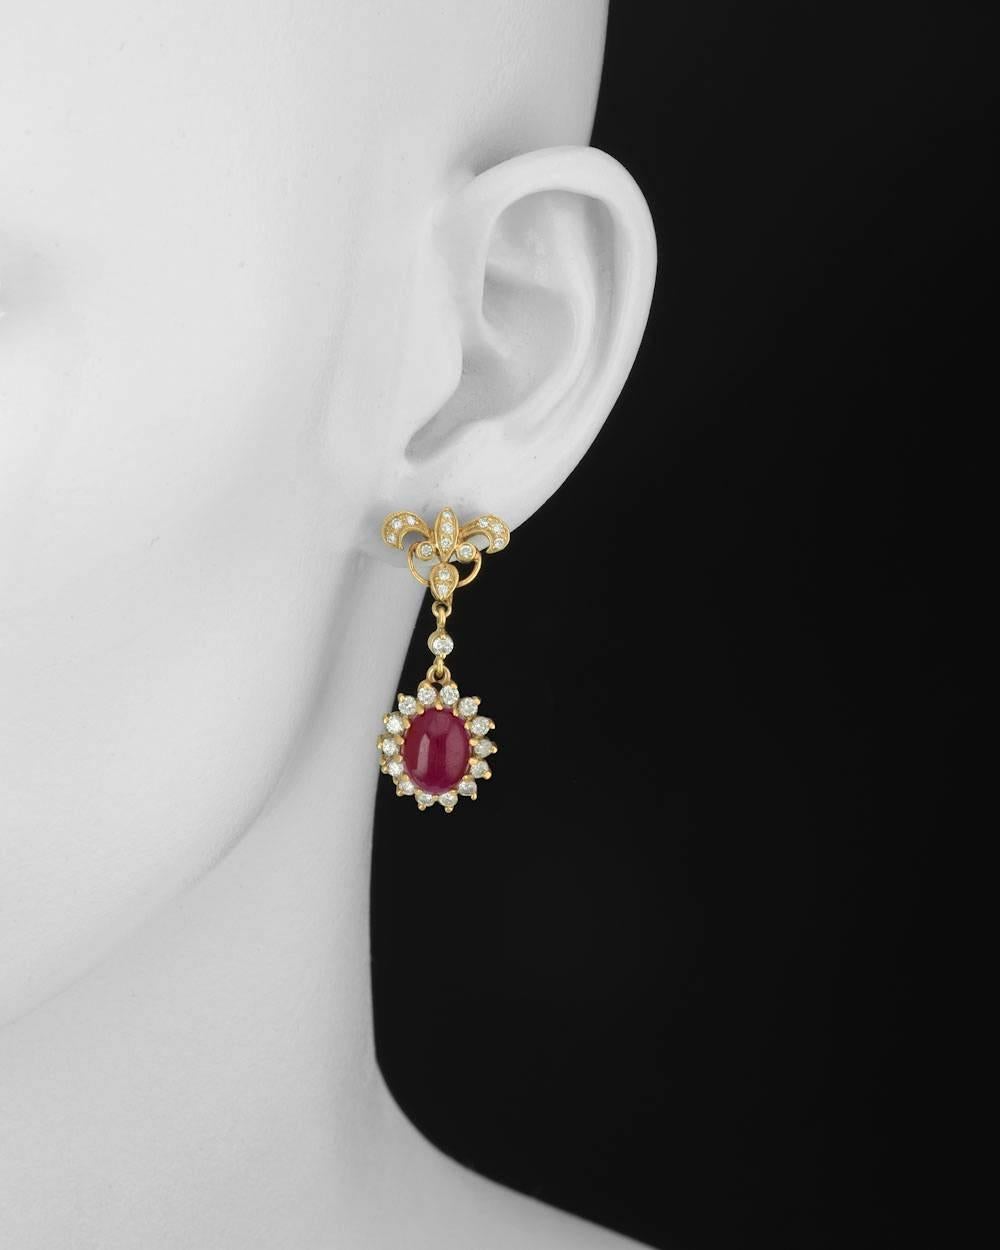 Ruby and diamond pendant earrings, showcasing a pair of larger oval-shaped cabochon-cut rubies weighing approximately 11.90 total carats, accented by round diamonds weighing approximately 1.20 total carats, mounted in 14k yellow gold, with posts and